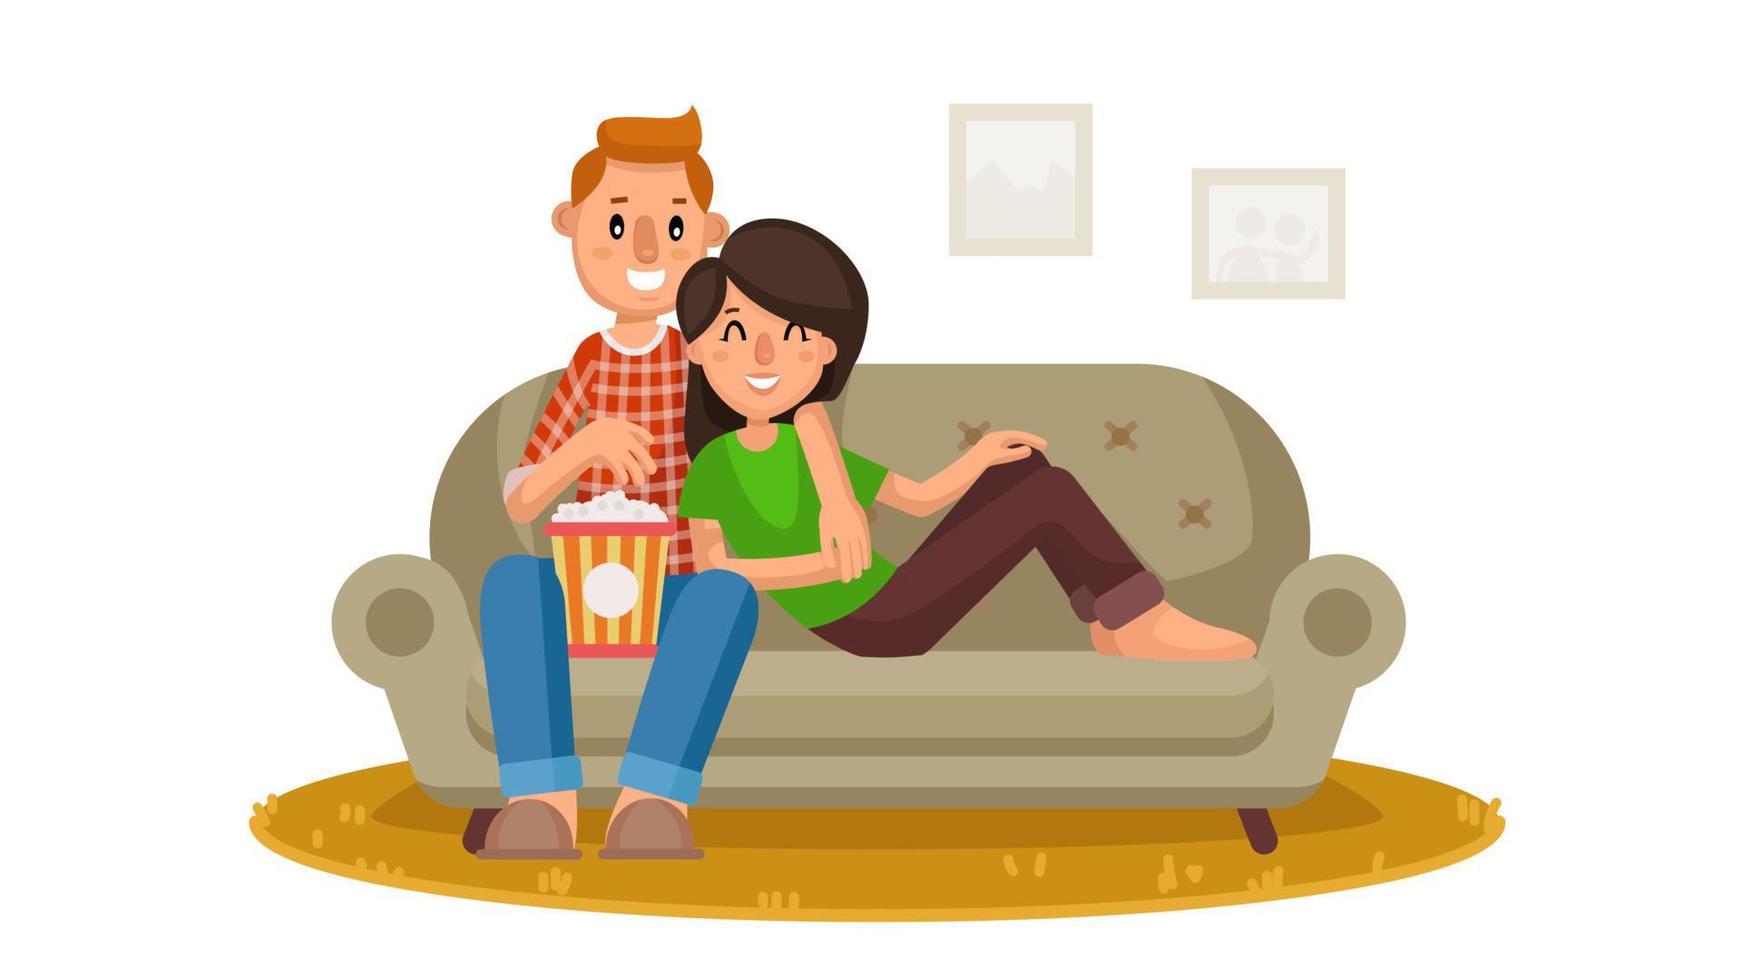 Home Cinema Vector. Home Room With TV Screen. Using Television Together. Online Home Movie. Cartoon Character Illustration vector